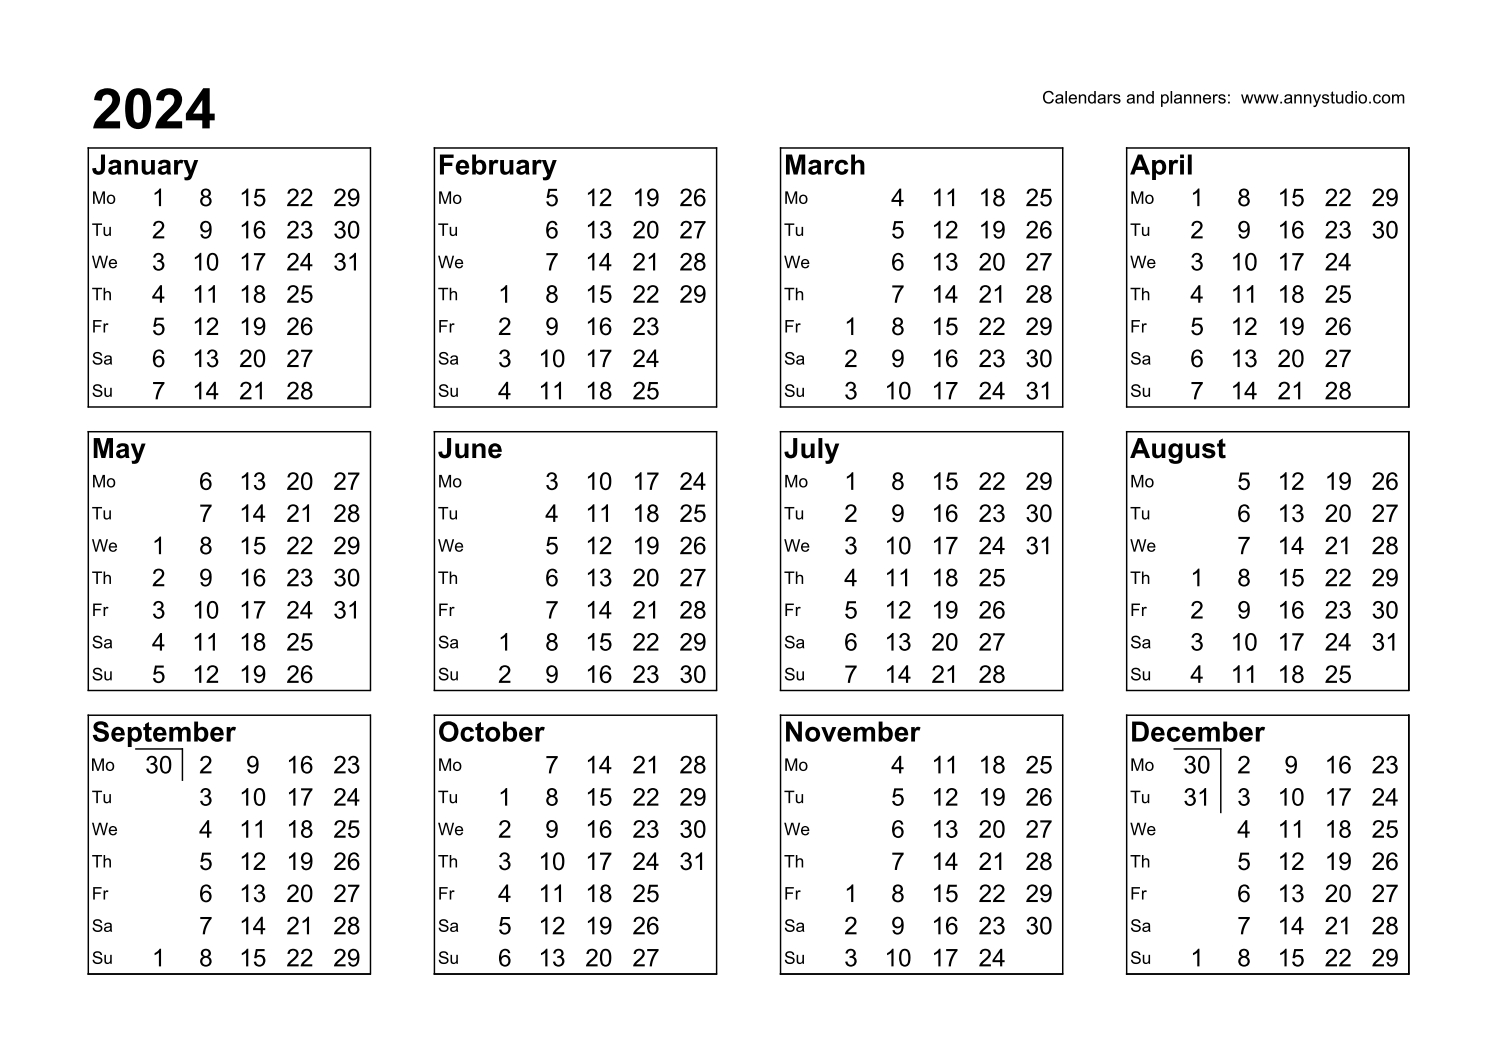 Free Printable Calendars And Planners 2024, 2025 And 2026 | 2024 Calendar Qld Printable